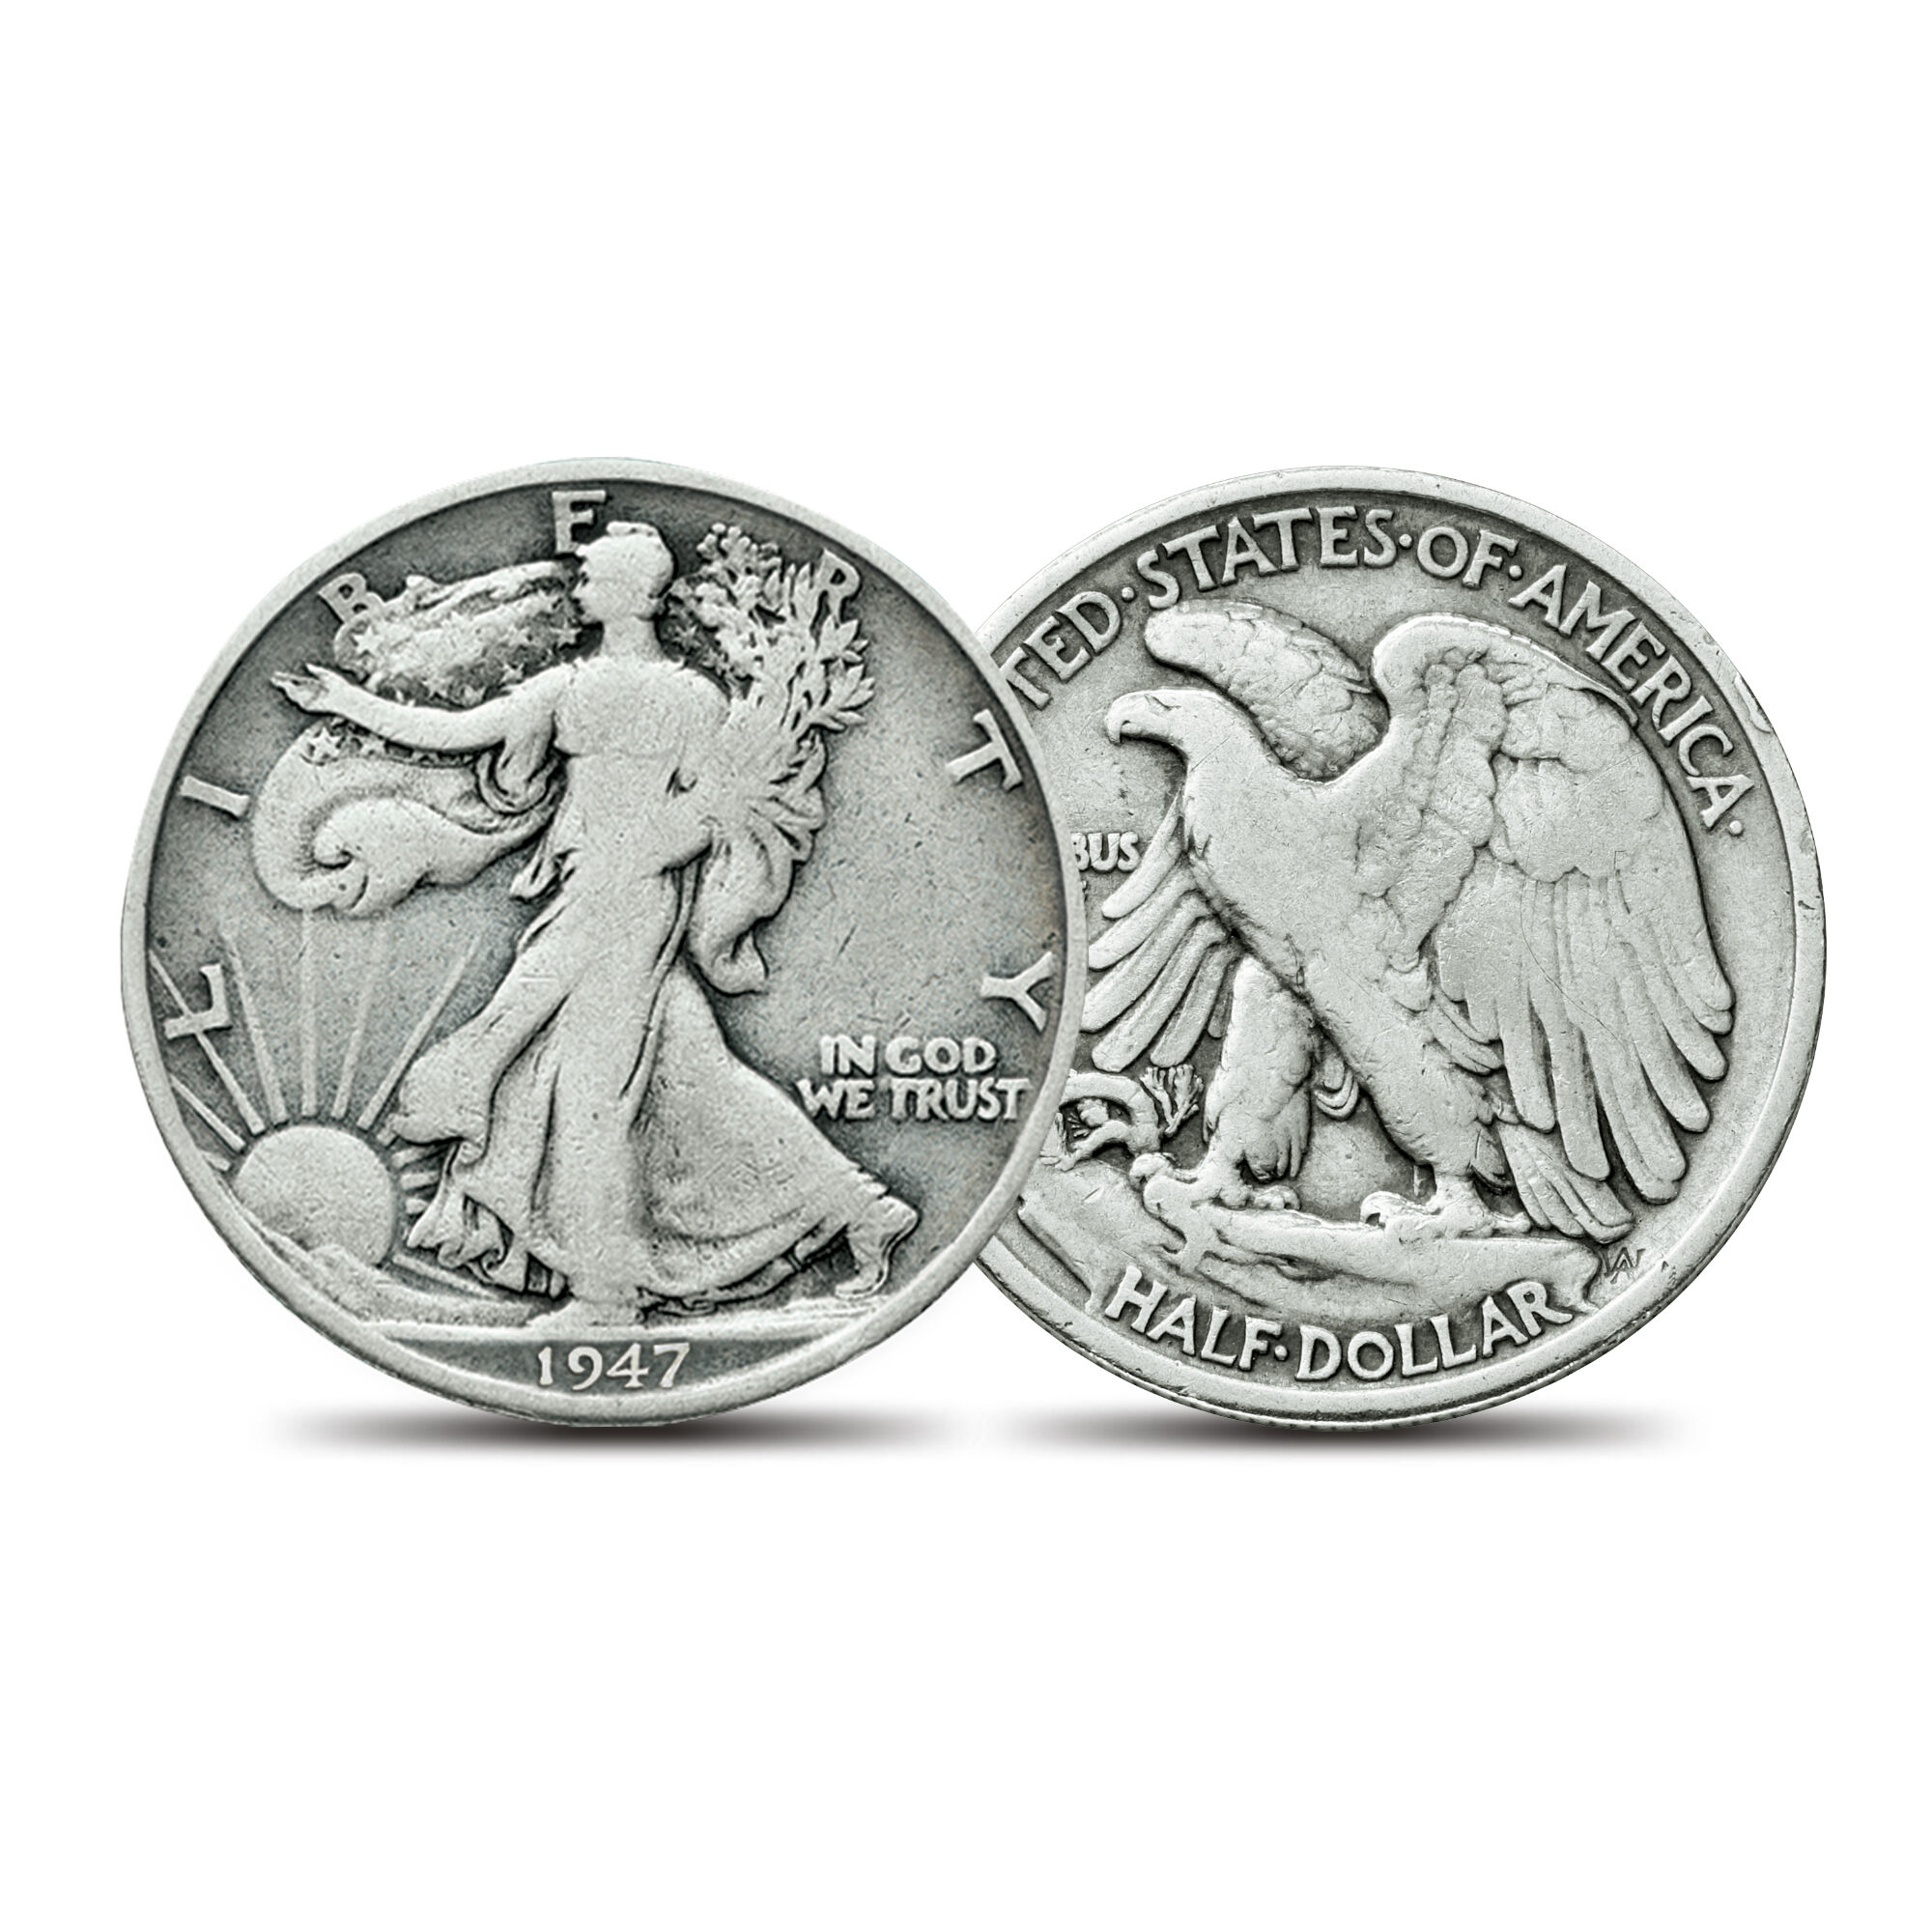 The Last U.S. Silver Half Dollars of the 20th Century 10545 0019 c coin